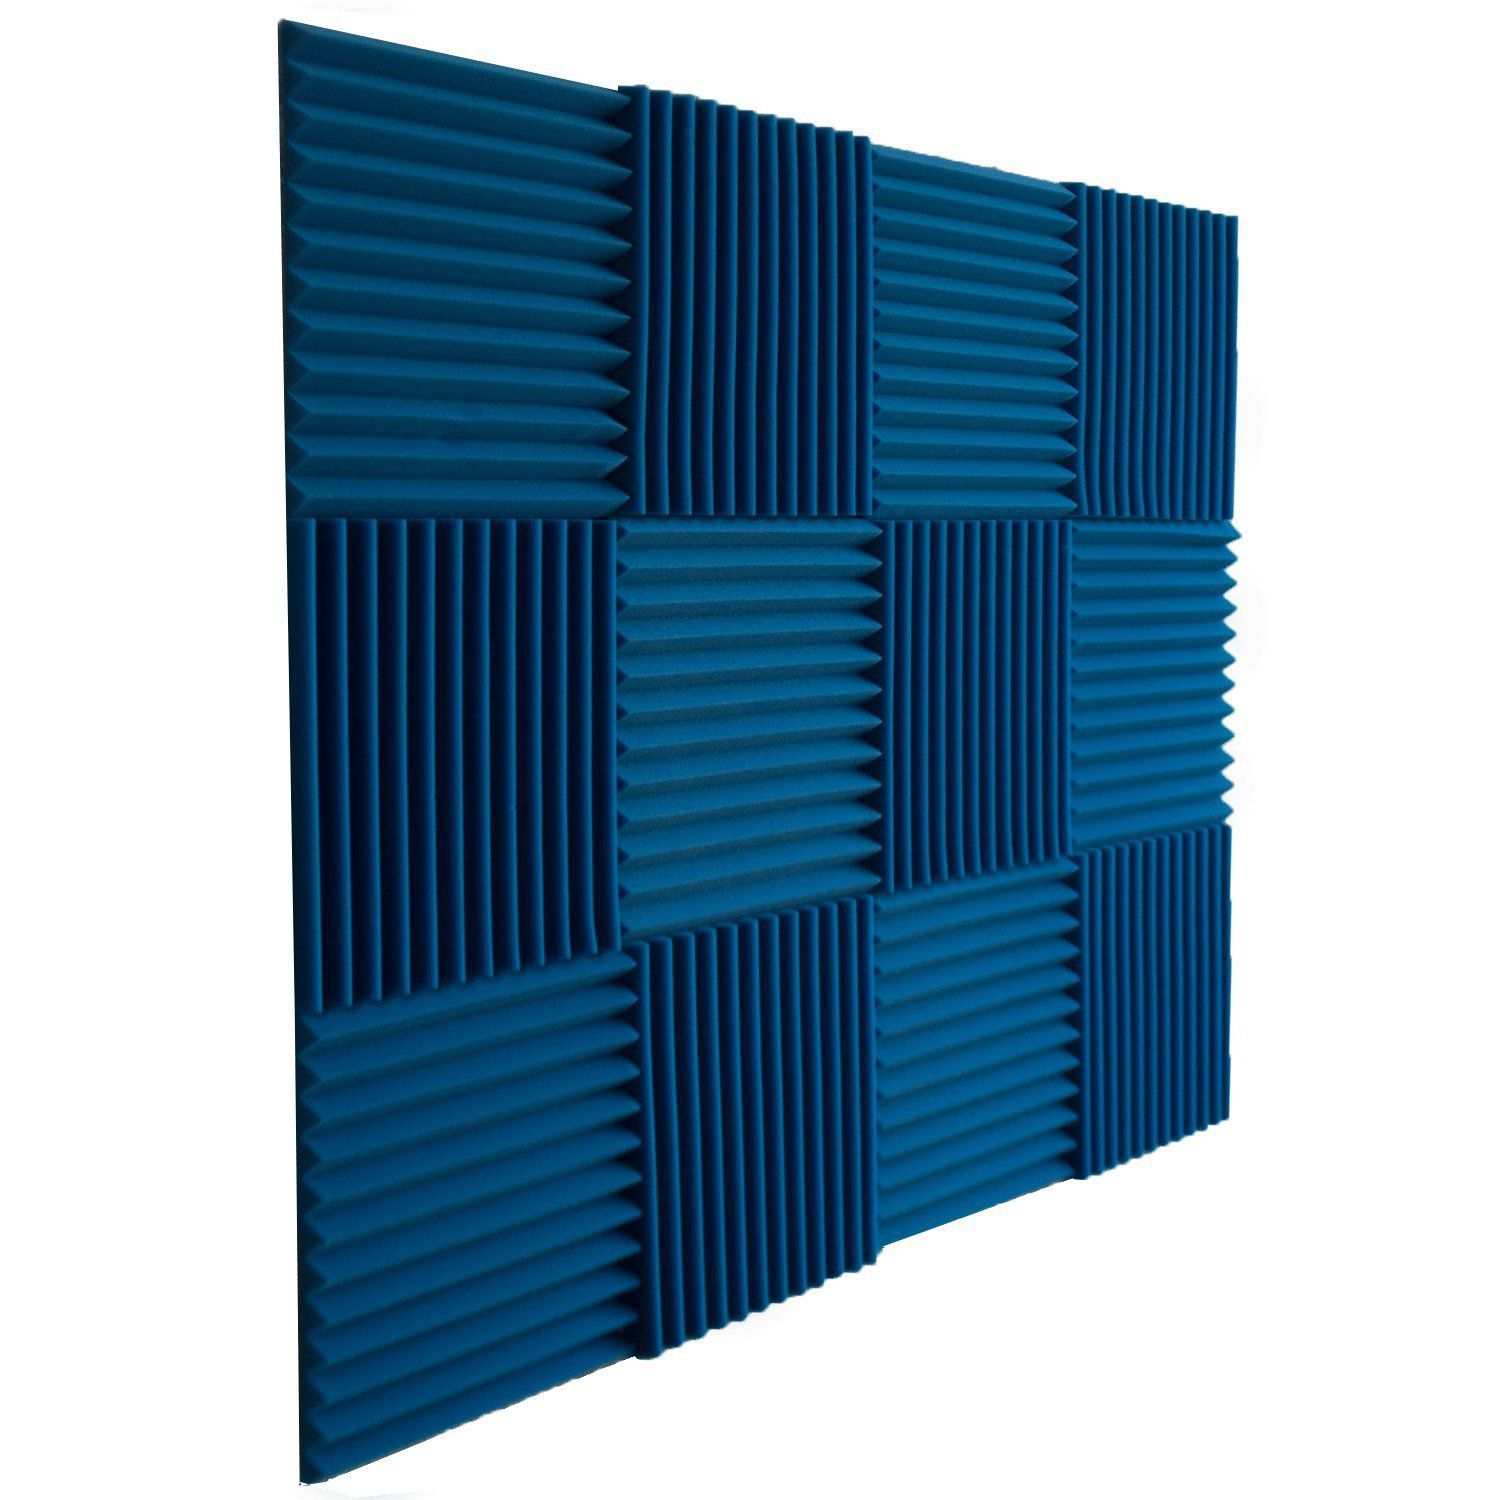 Improving Sound Quality With Room Acoustic Treatments